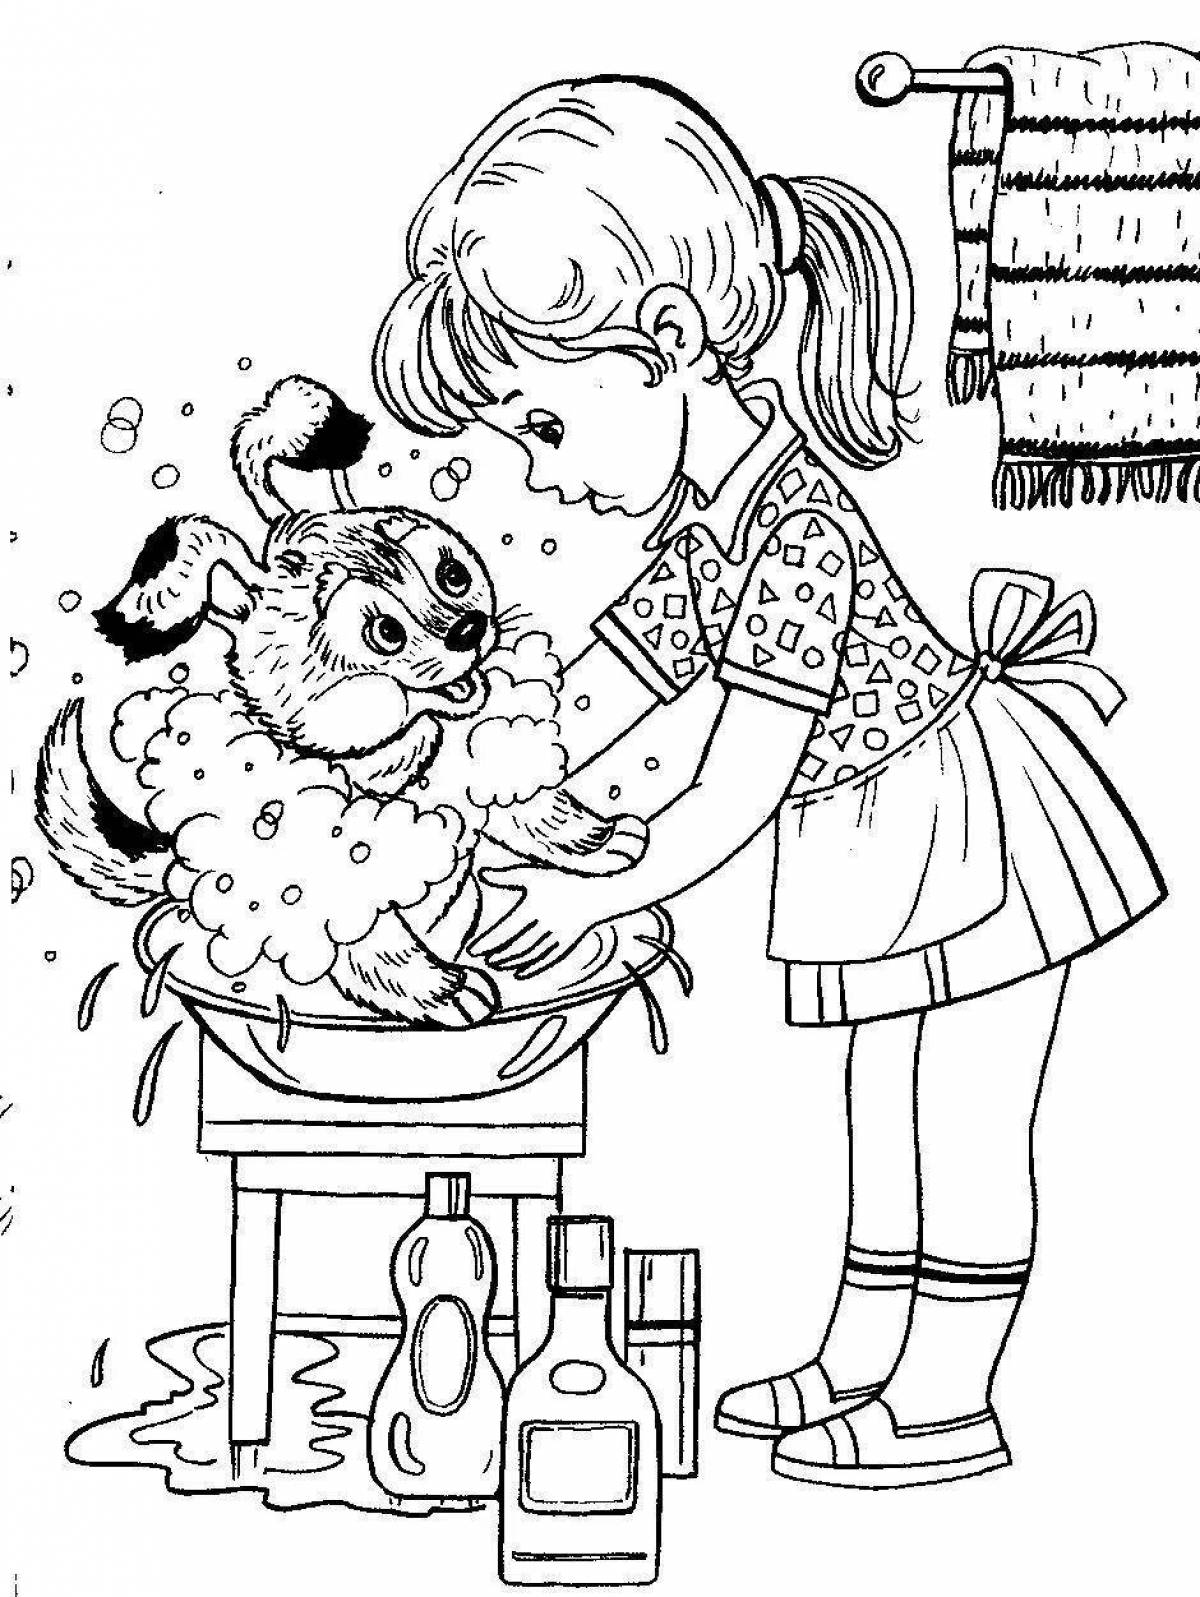 Crazy Kindness coloring page